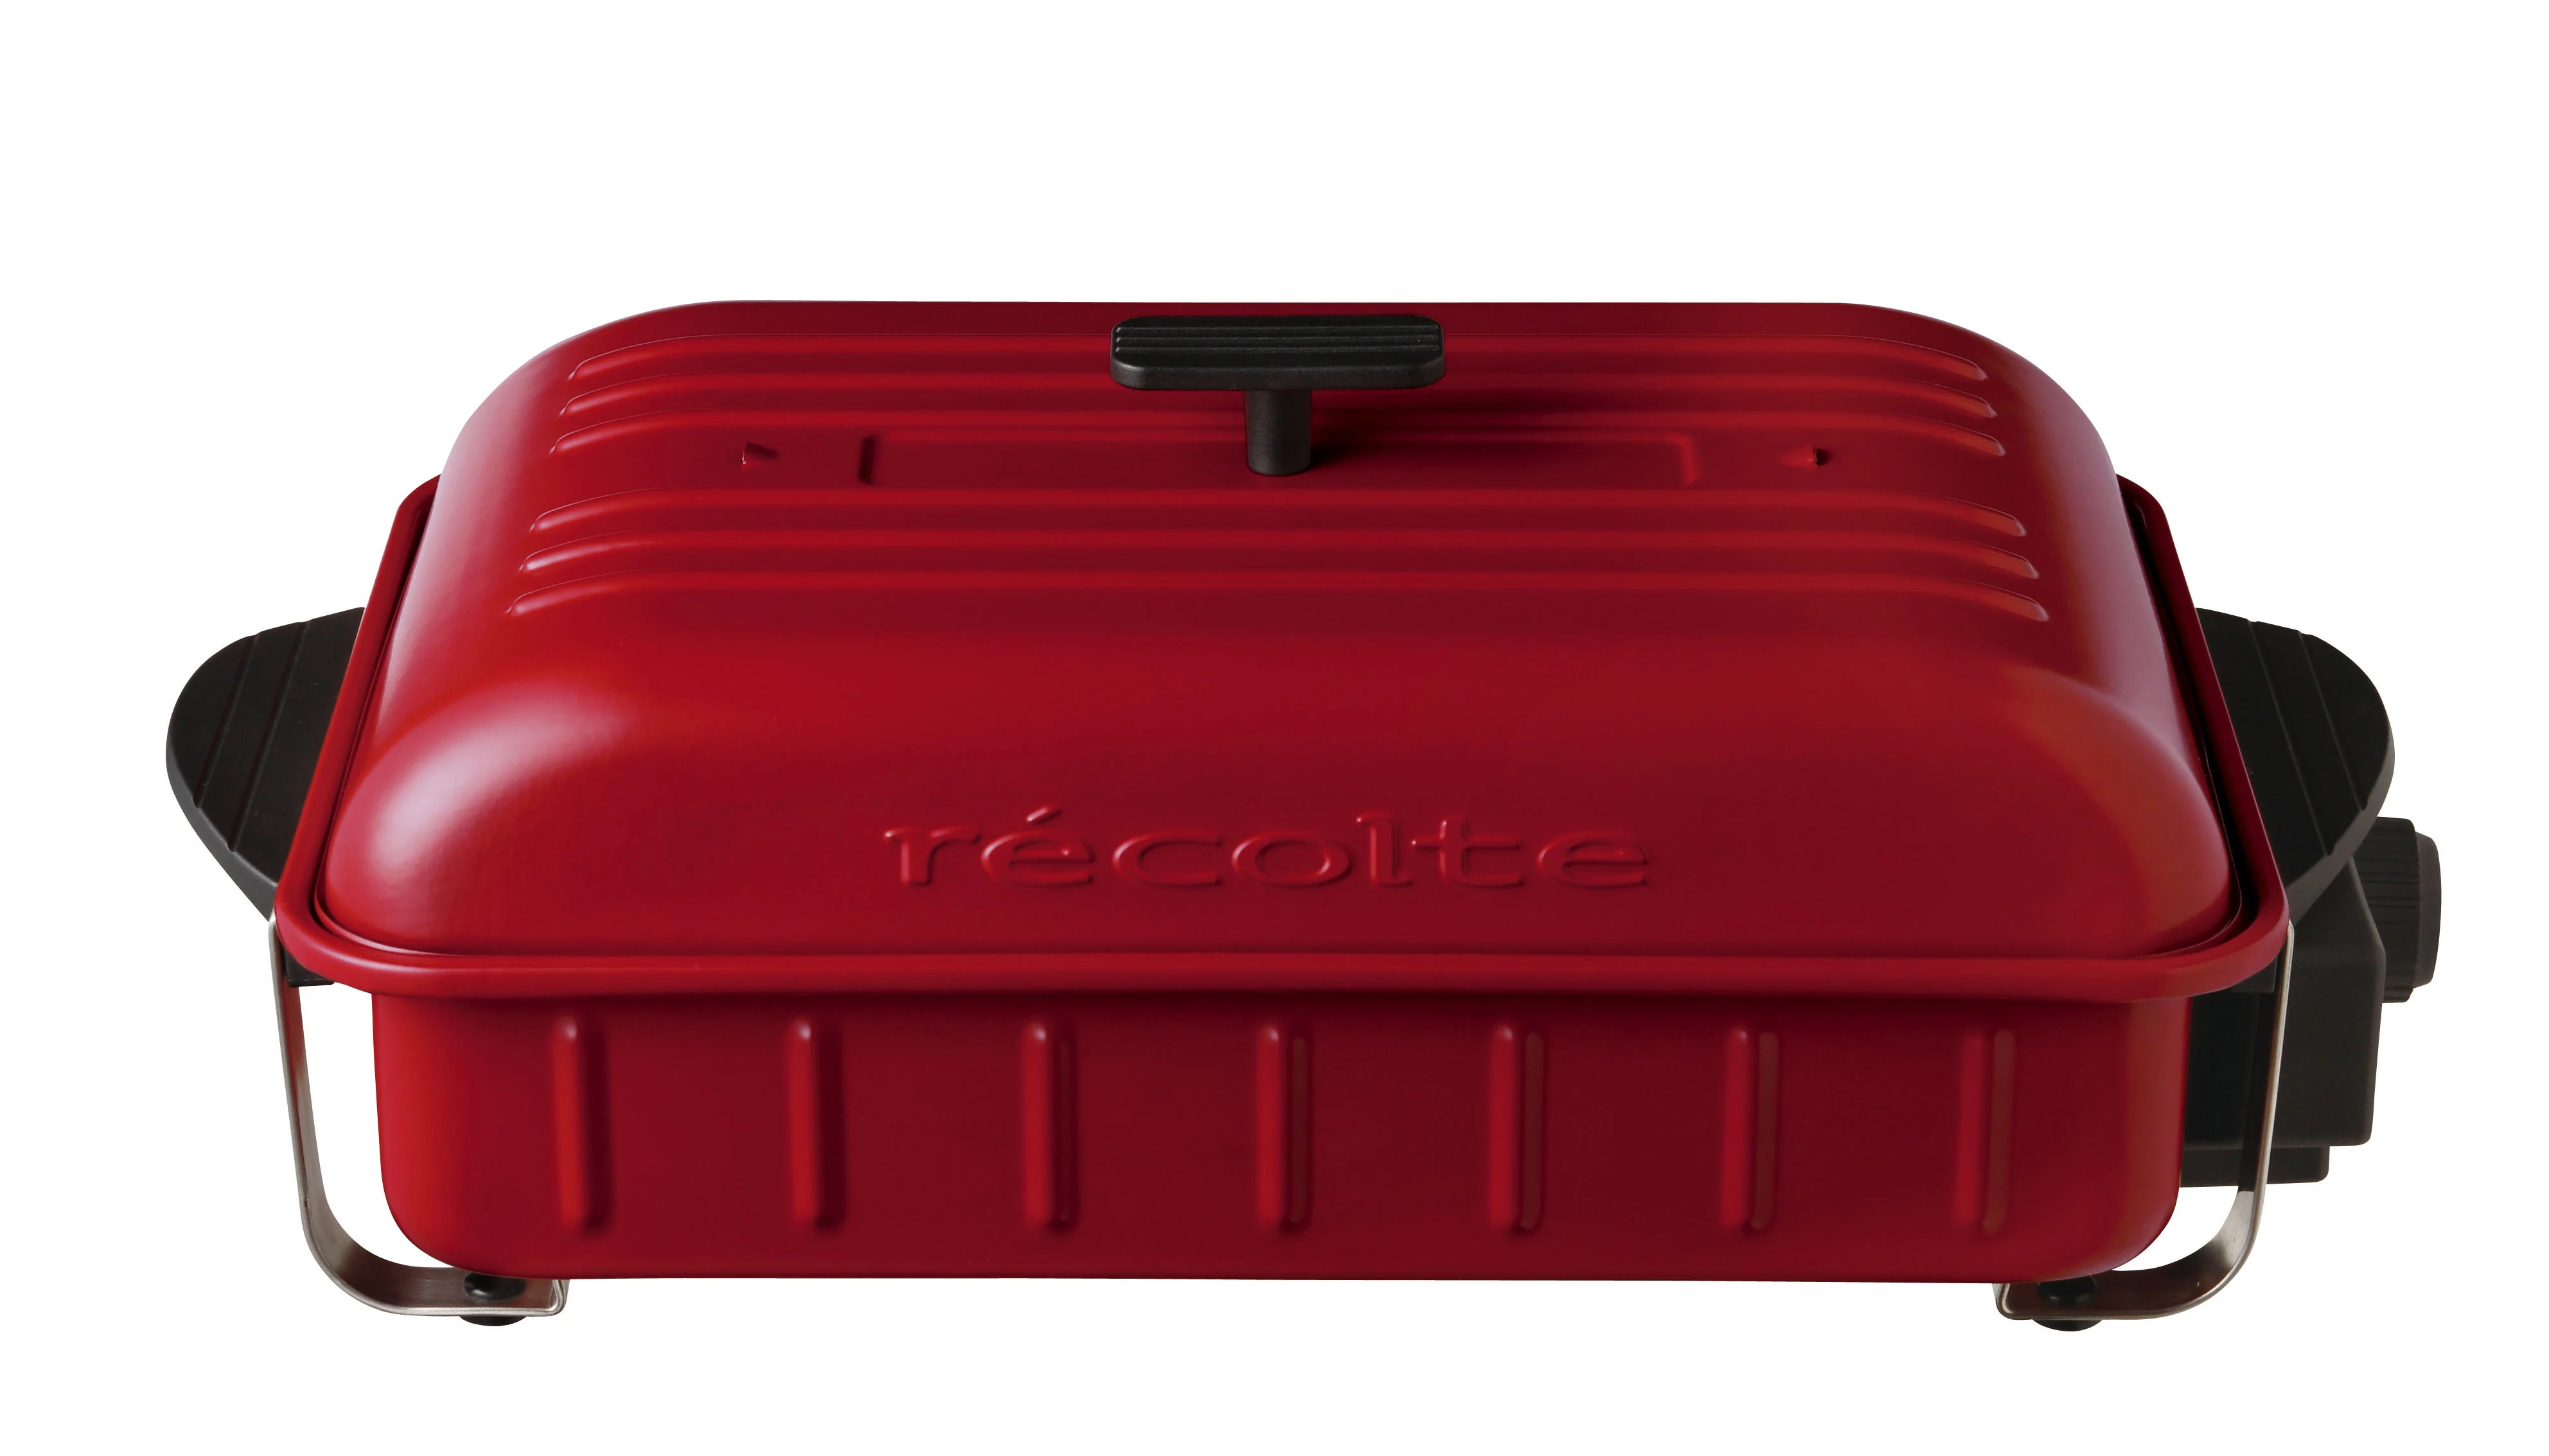 récolte Home RBQ-1(R) Multi Functional Hot Plate - Red